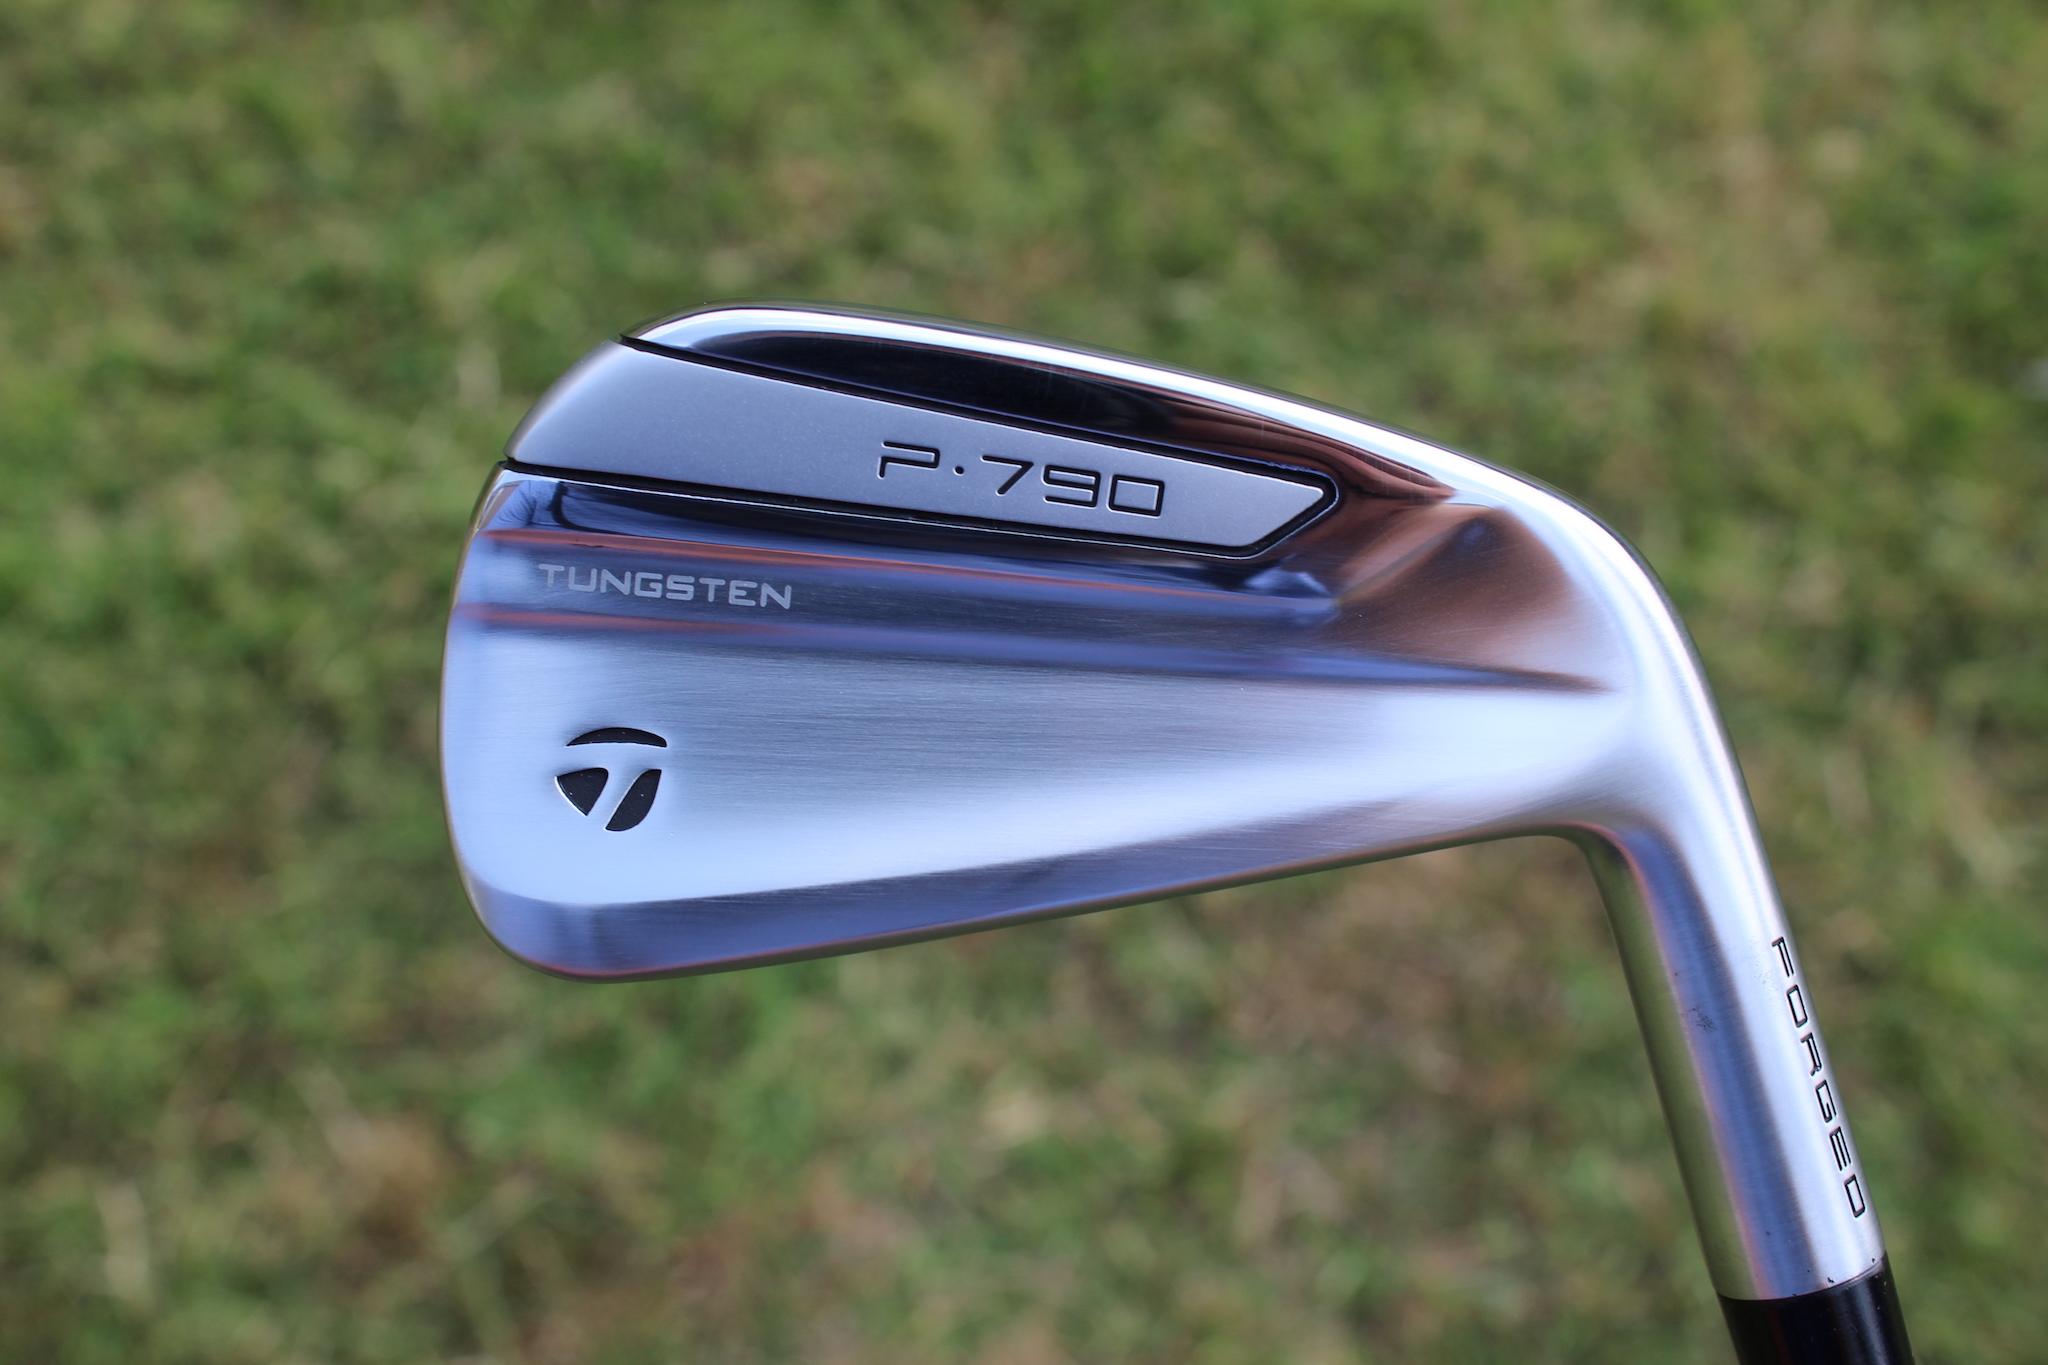 New 2019 TaylorMade P790 irons: Subtle changes improve a modern 